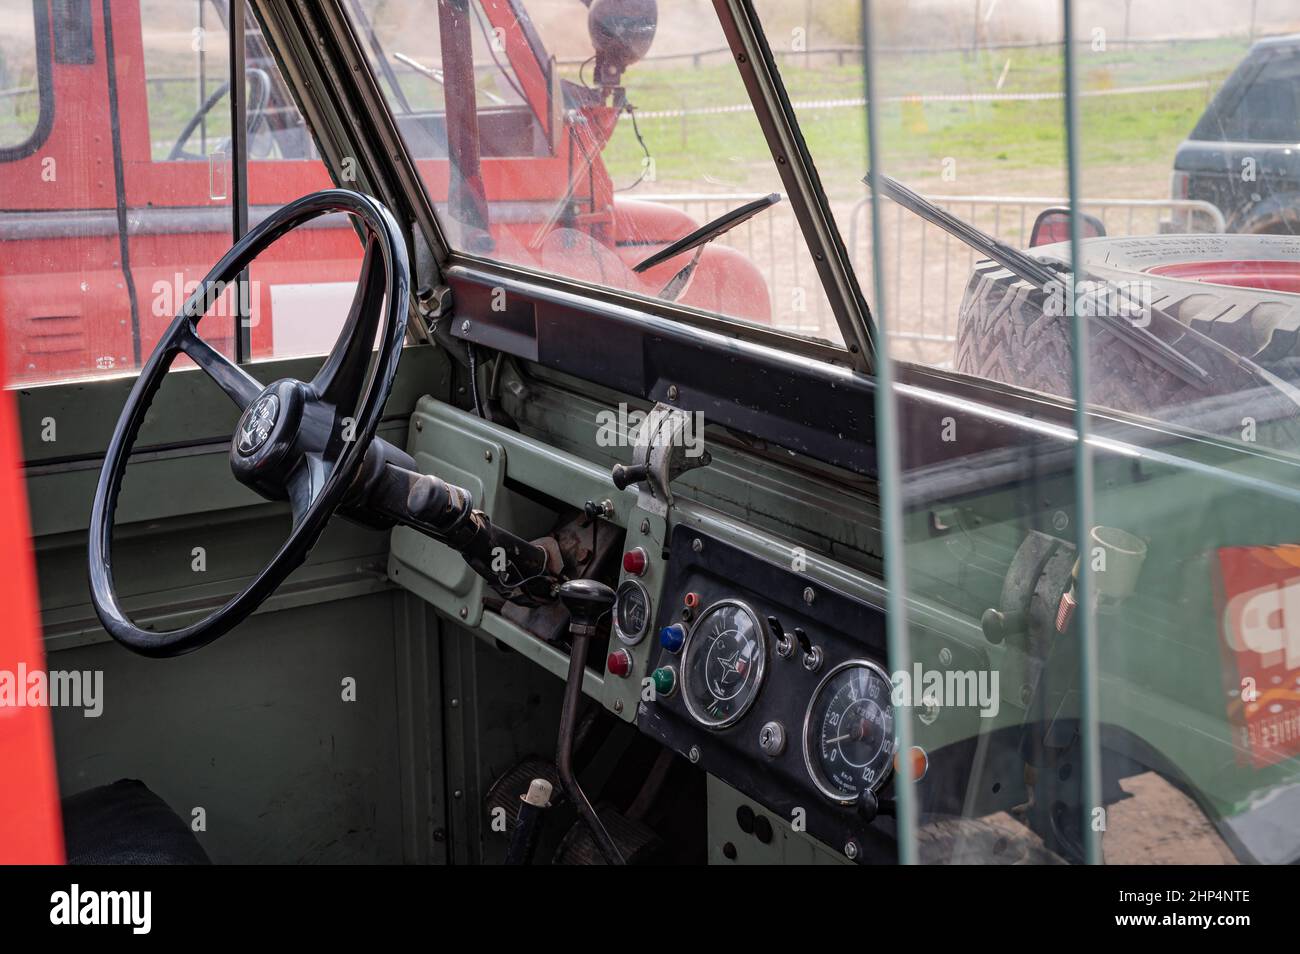 View of the Interior cabin of a Land Rover Santana vehicle in Suria, Spain Stock Photo